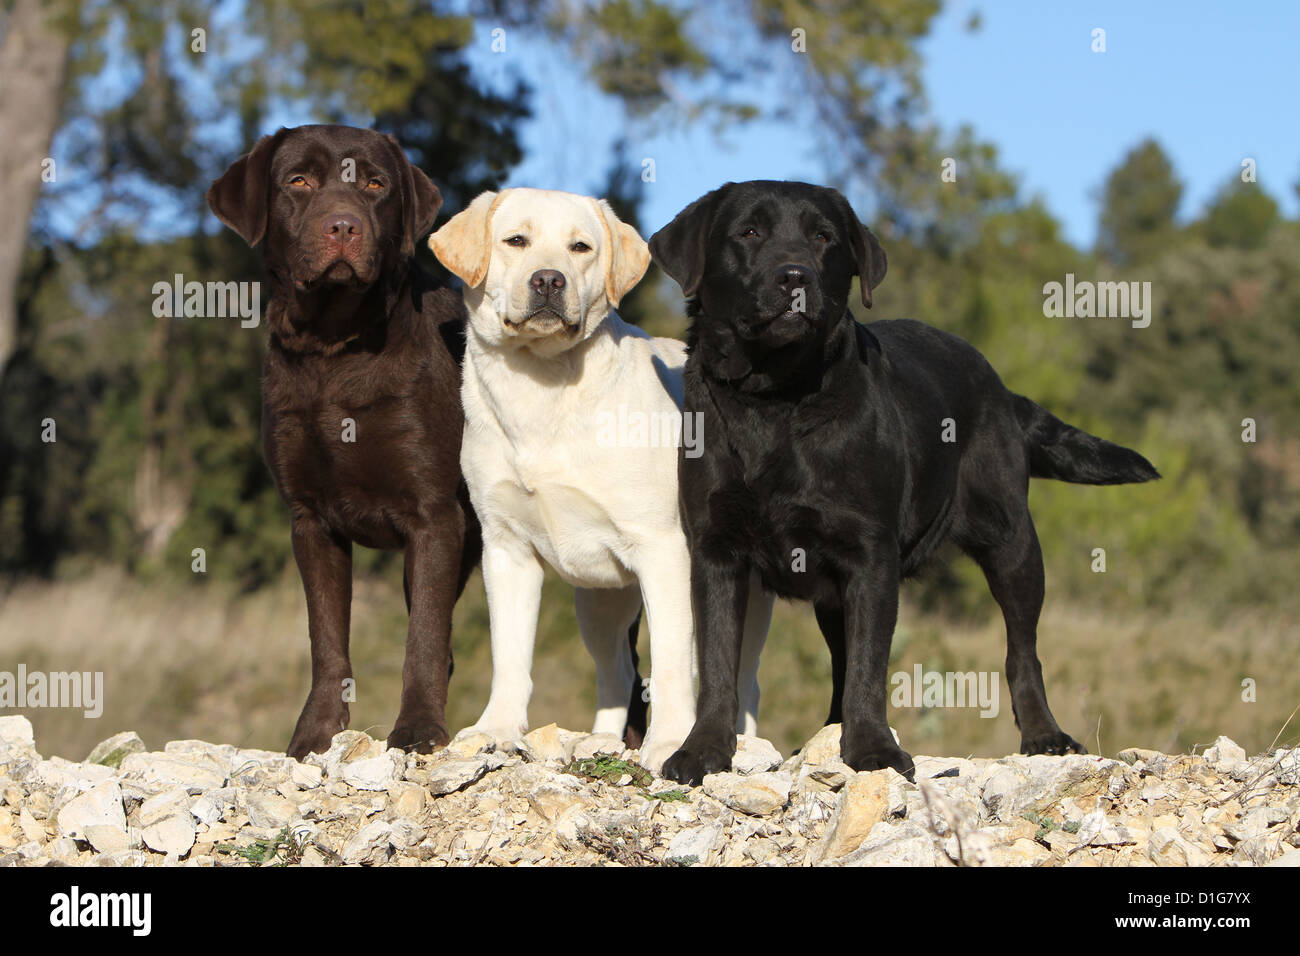 Dog Labrador Retriever  three adults different colors (chocolate, yellow and black) standing on a wall Stock Photo